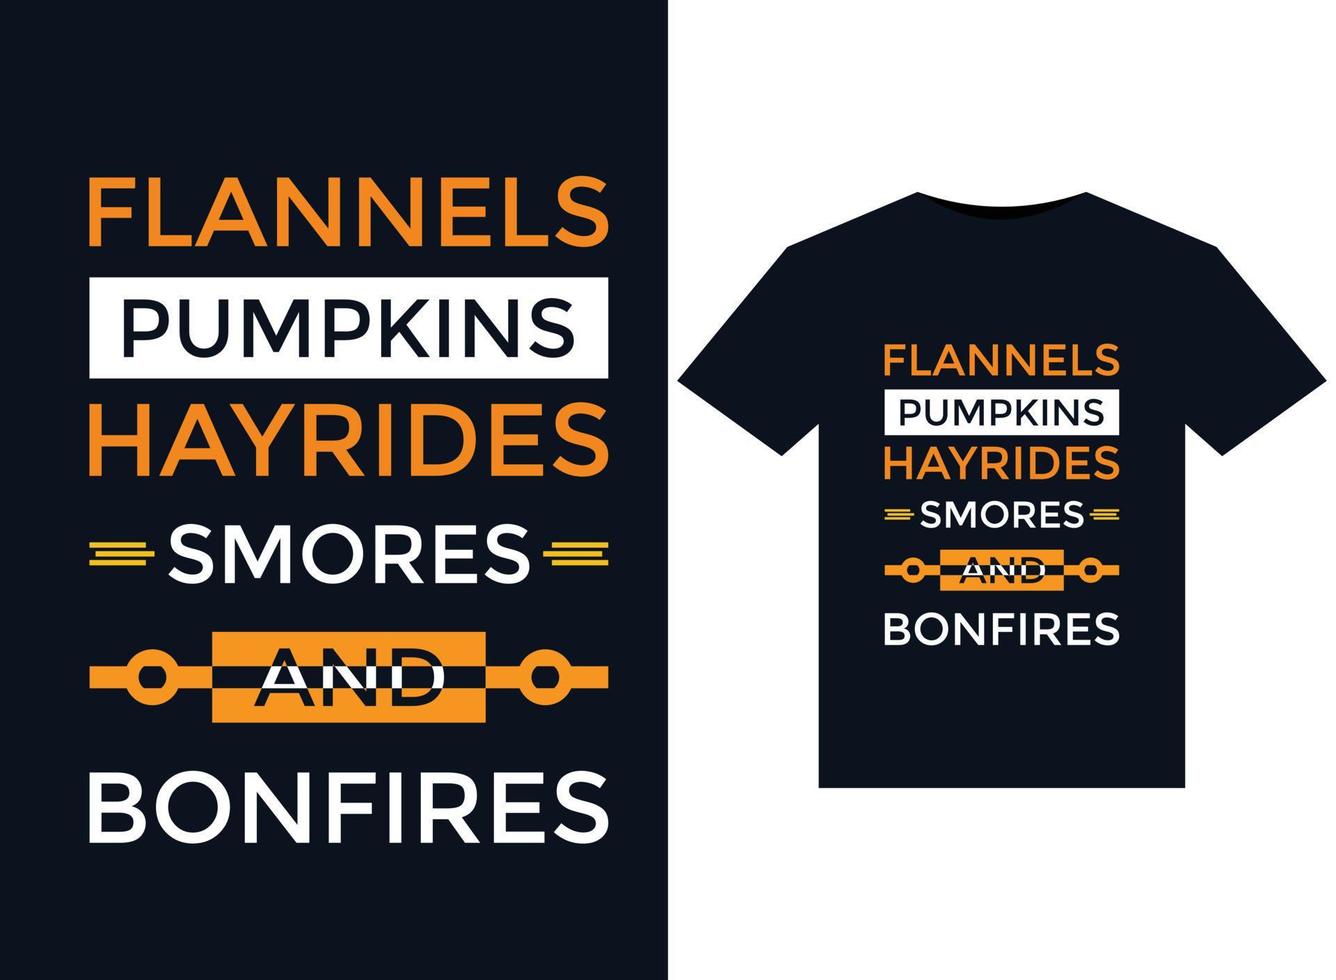 Flannels pumpkins hayrides smores and bonfires T-Shirts typography vector illustration for print-ready graphic design